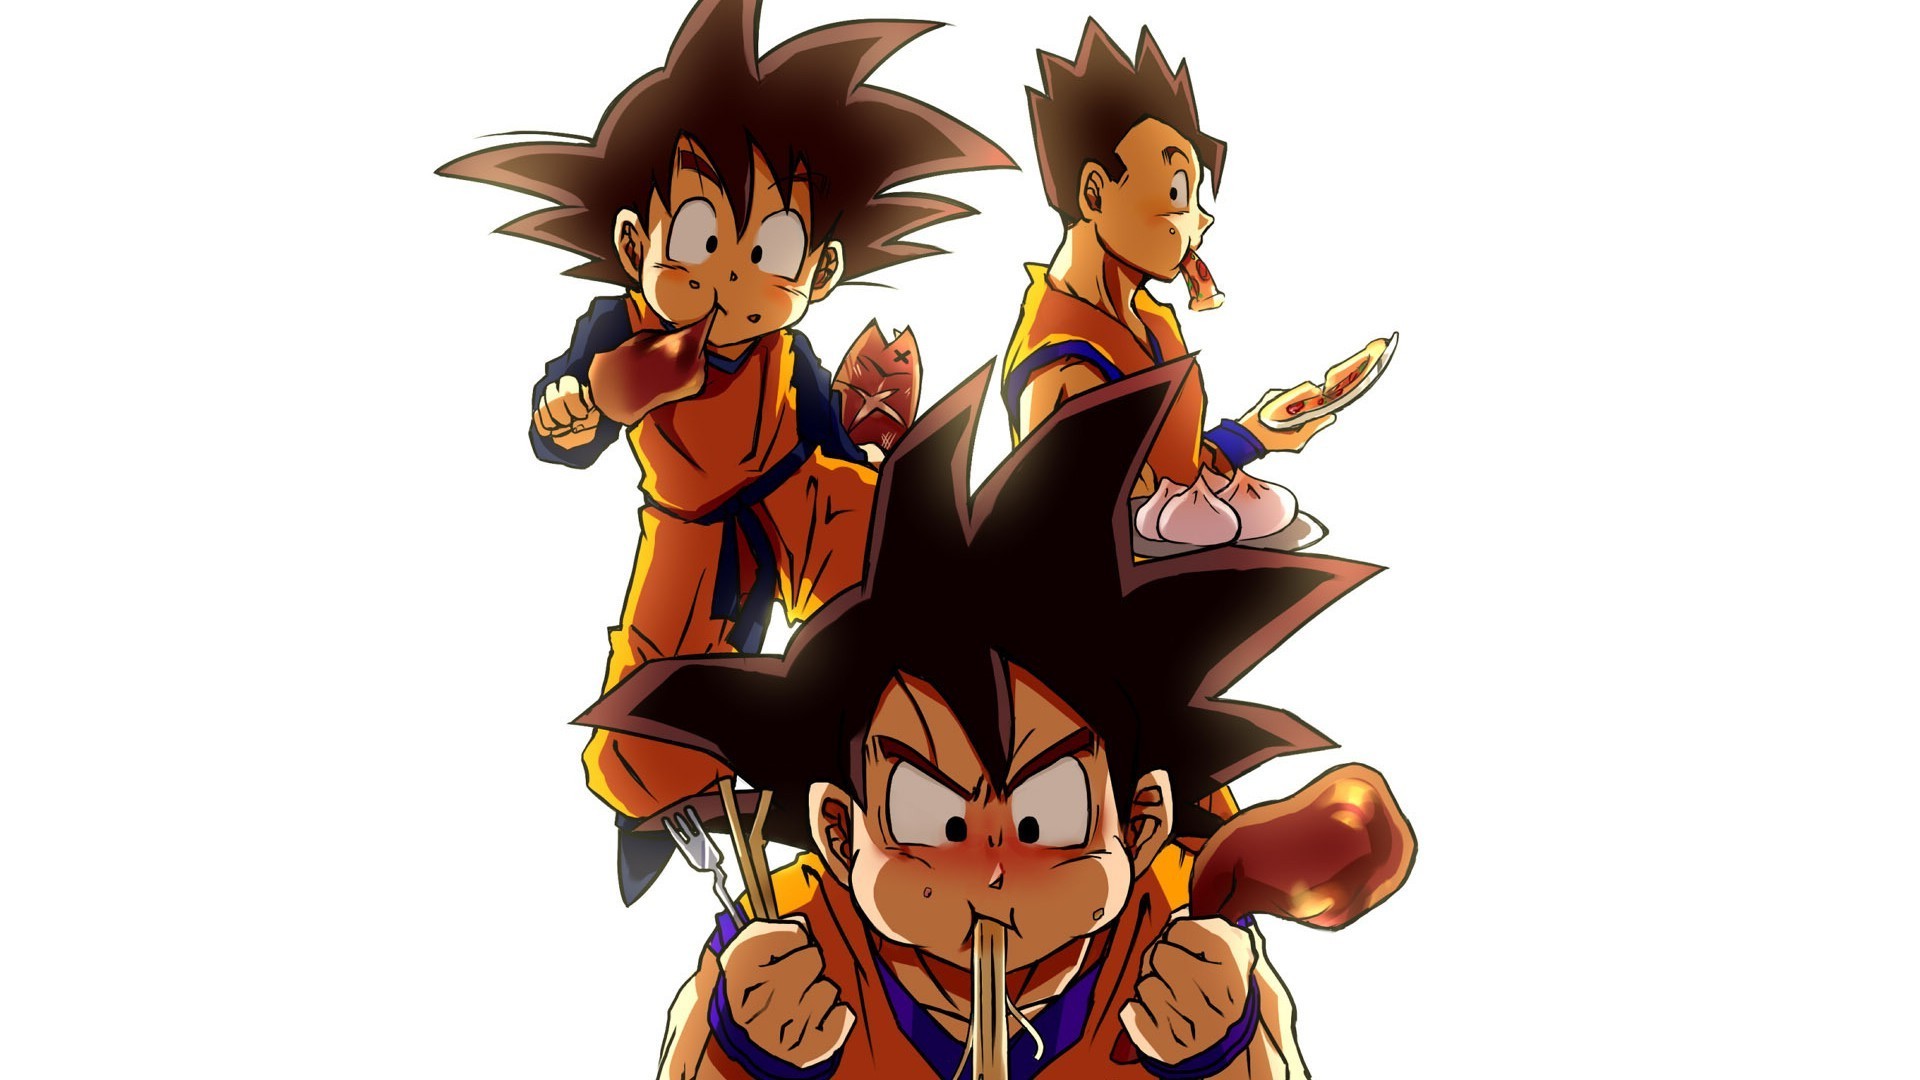 Kid Goku HD Wallpaper With Resolution 1920X1080 pixel. You can make this wallpaper for your Desktop Computer Backgrounds, Mac Wallpapers, Android Lock screen or iPhone Screensavers